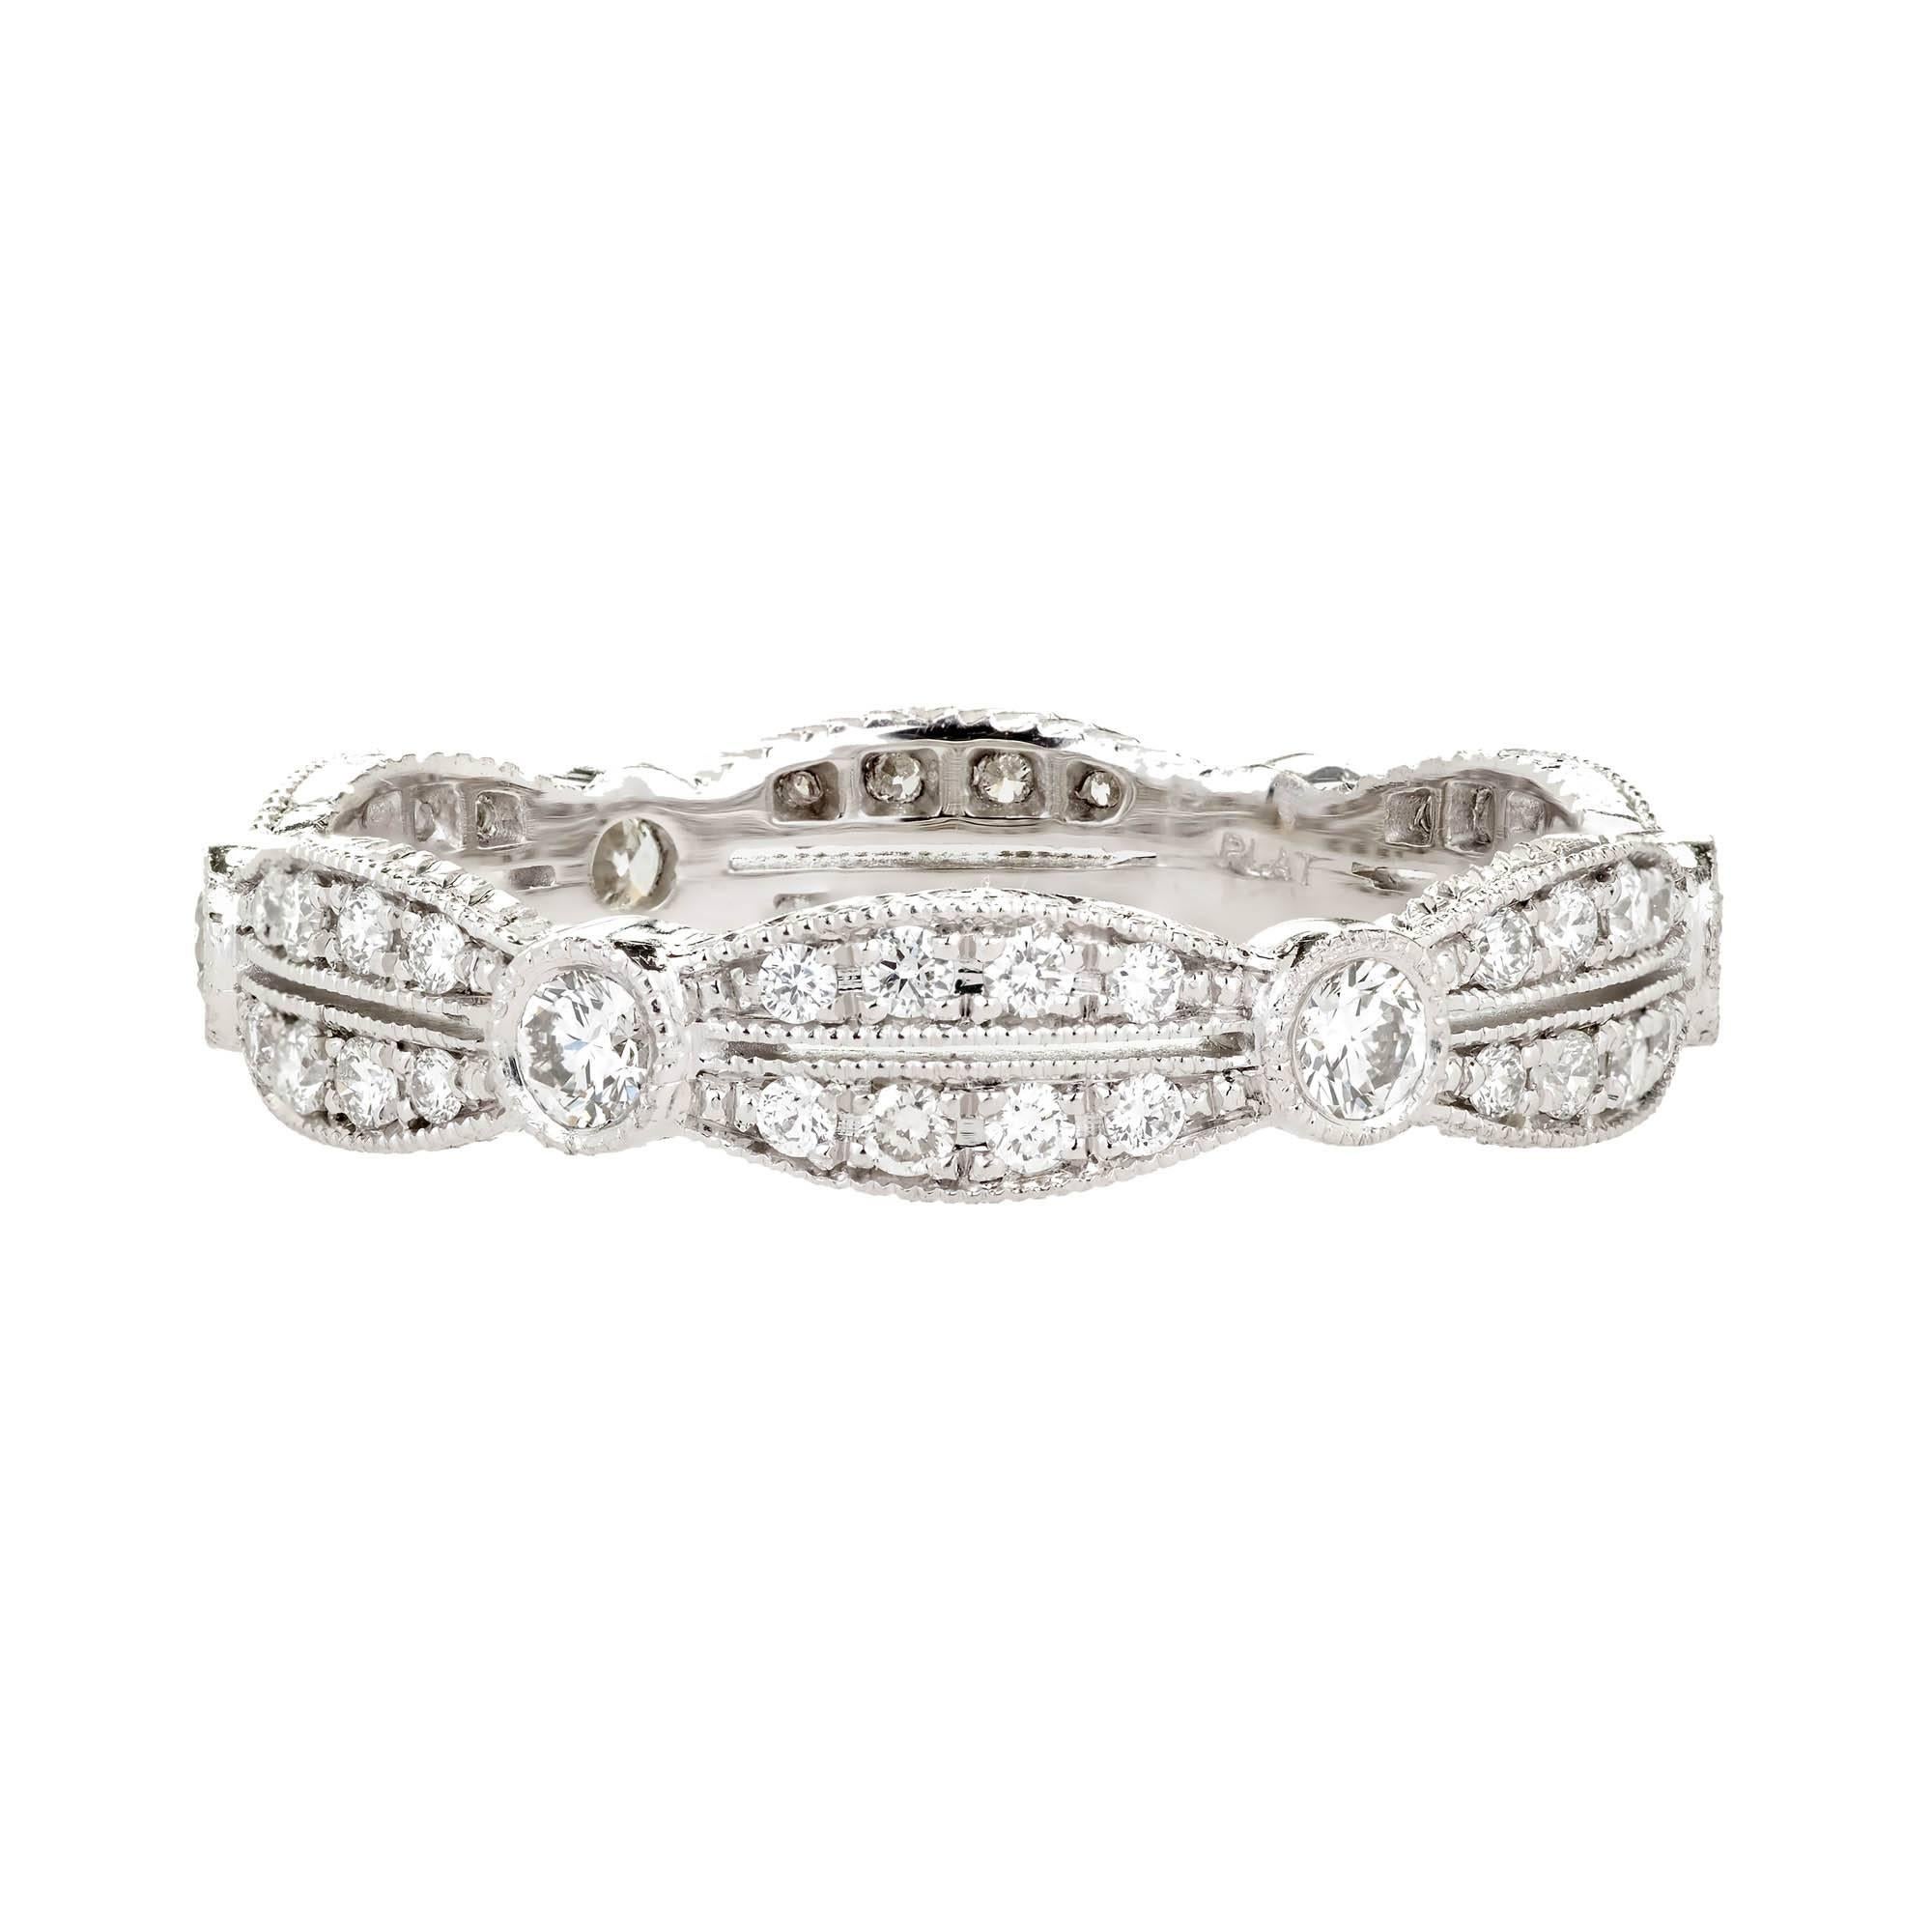 Peter Suchy antique inspired Platinum Diamond Eternity ring with Ideal cut Diamonds bead set, milgrain edges and hand engraved, all hand done techniques. This ring is not sizable but can be made in any finger size. 

6 round full cut Diamonds,